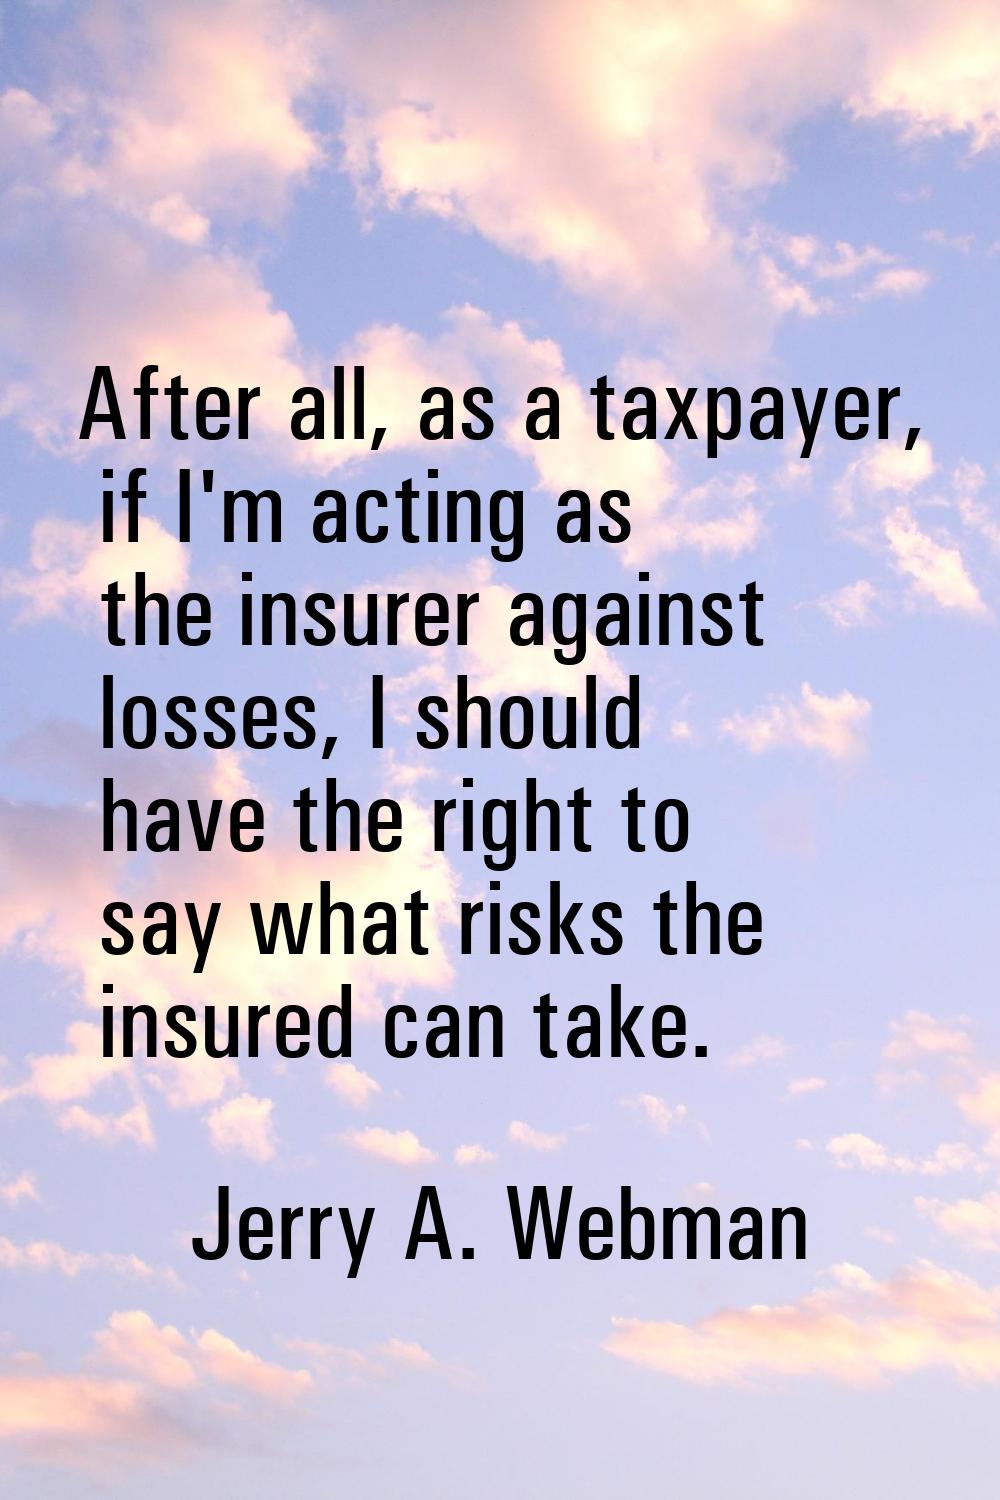 After all, as a taxpayer, if I'm acting as the insurer against losses, I should have the right to s